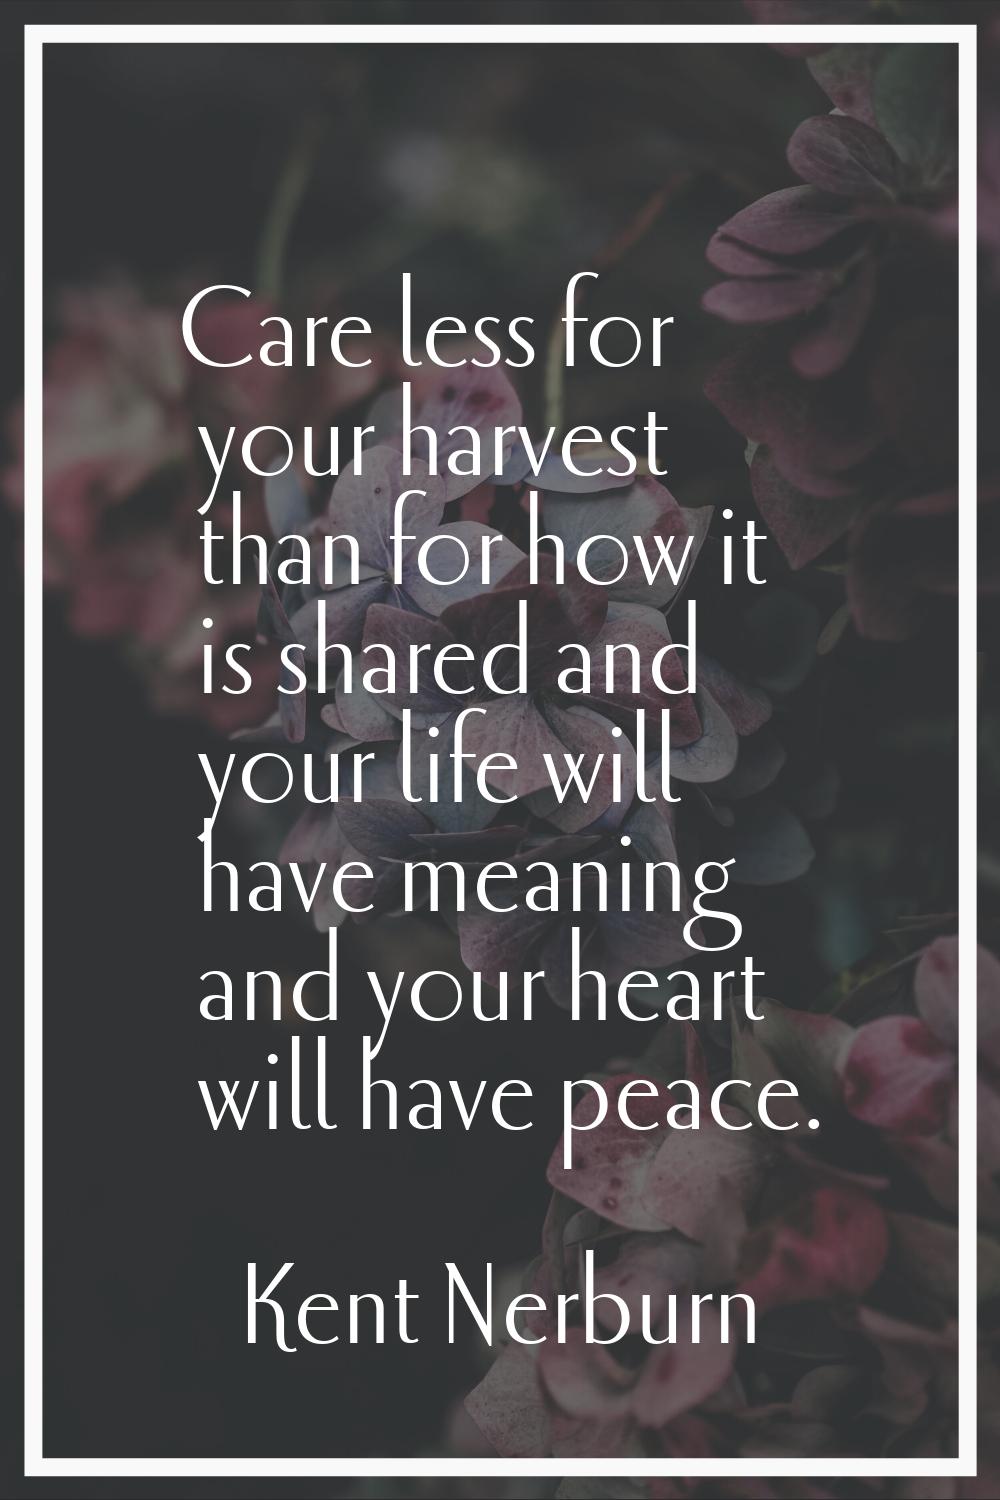 Care less for your harvest than for how it is shared and your life will have meaning and your heart